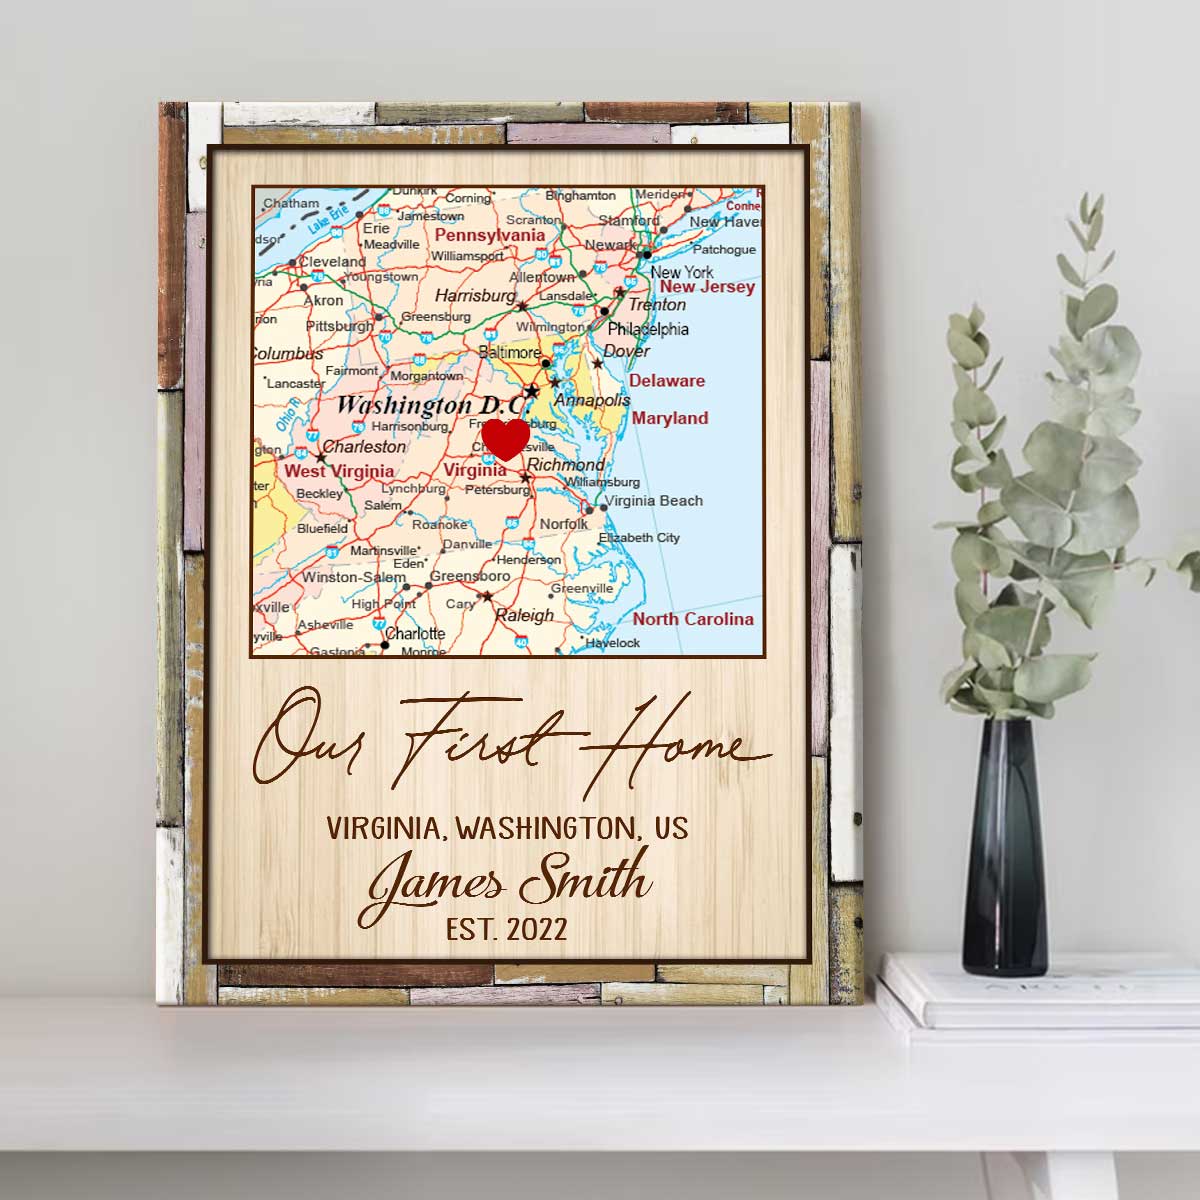 House Warming Gifts - Best Gifts for Housewarming - New Home Gifts for Home  | eBay